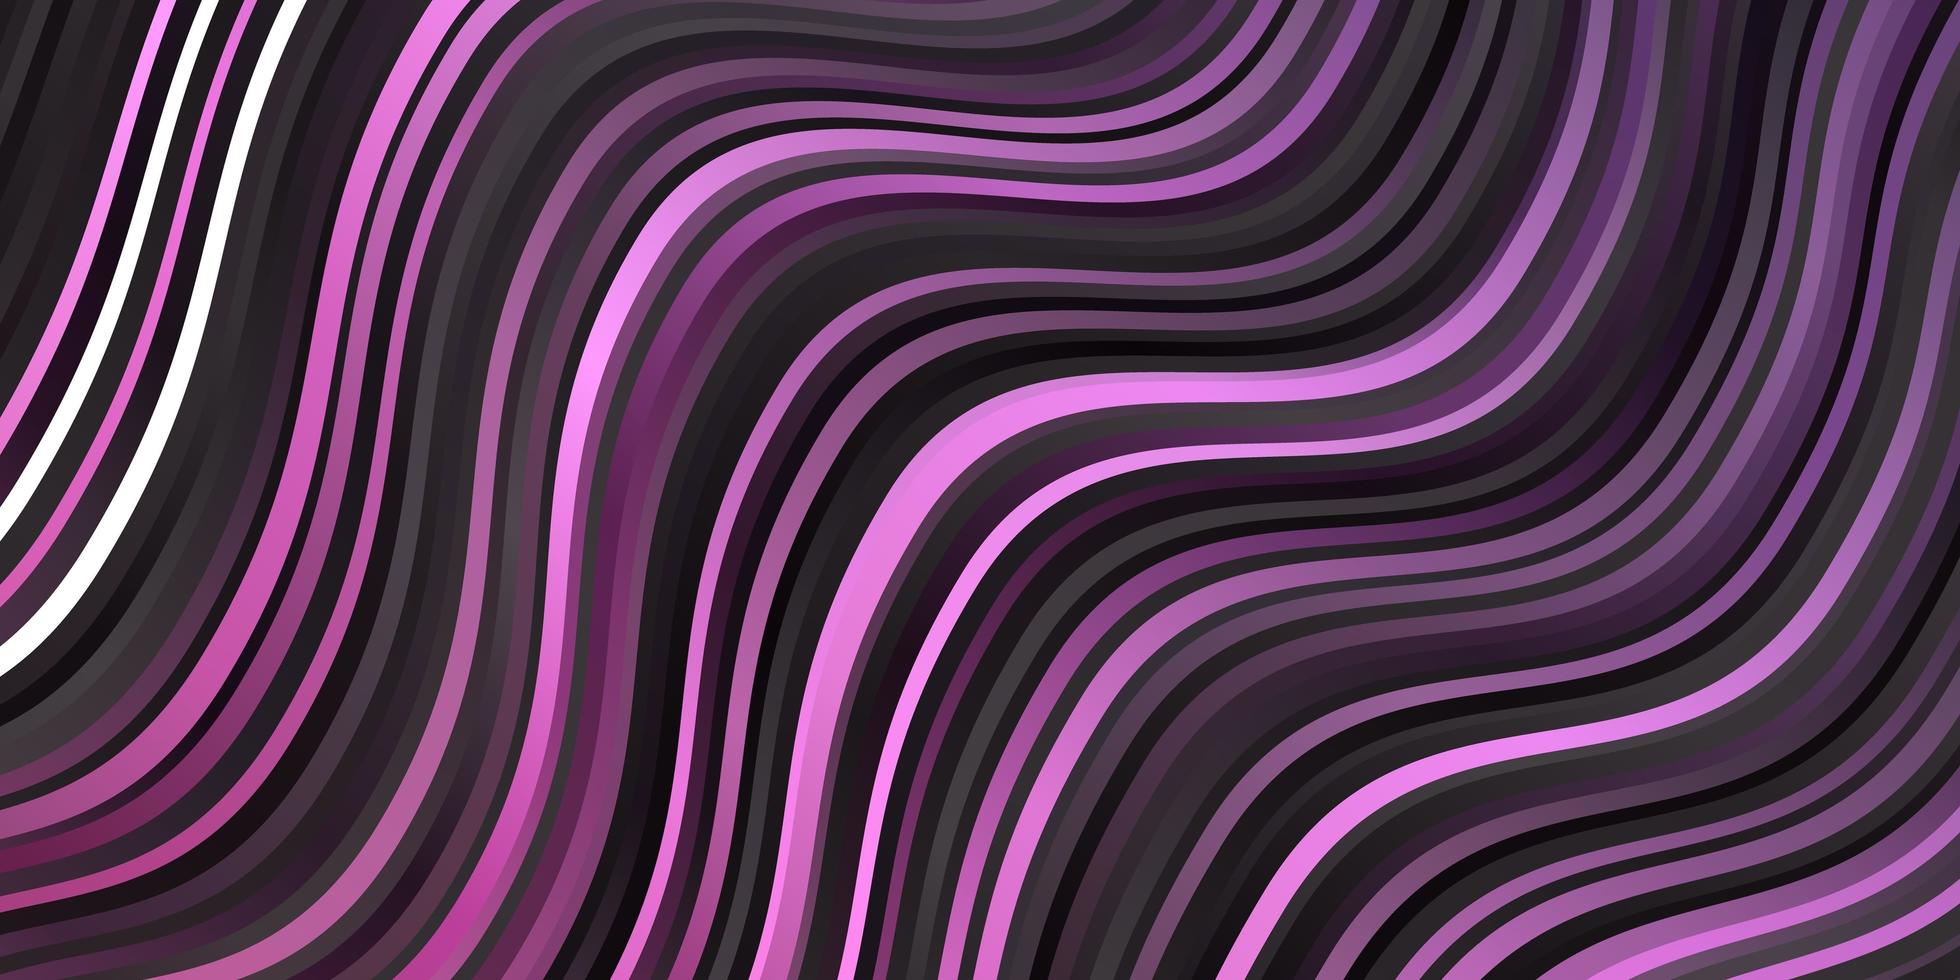 Dark Pink vector background with curves.